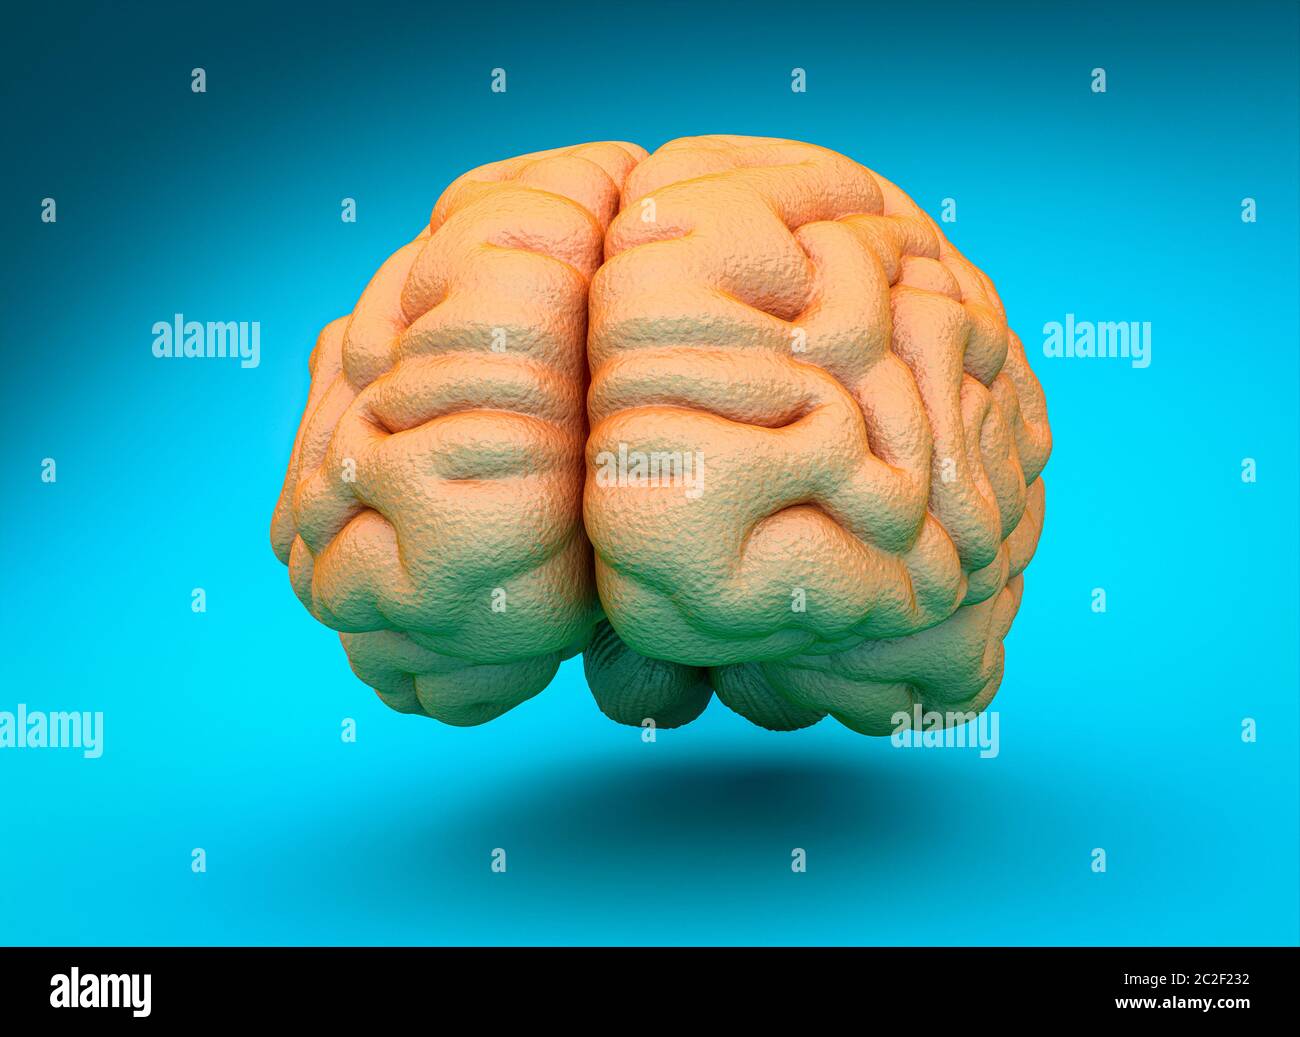 3d render of a human brain. concept of intelligence, creativity and wisdom. Stock Photo